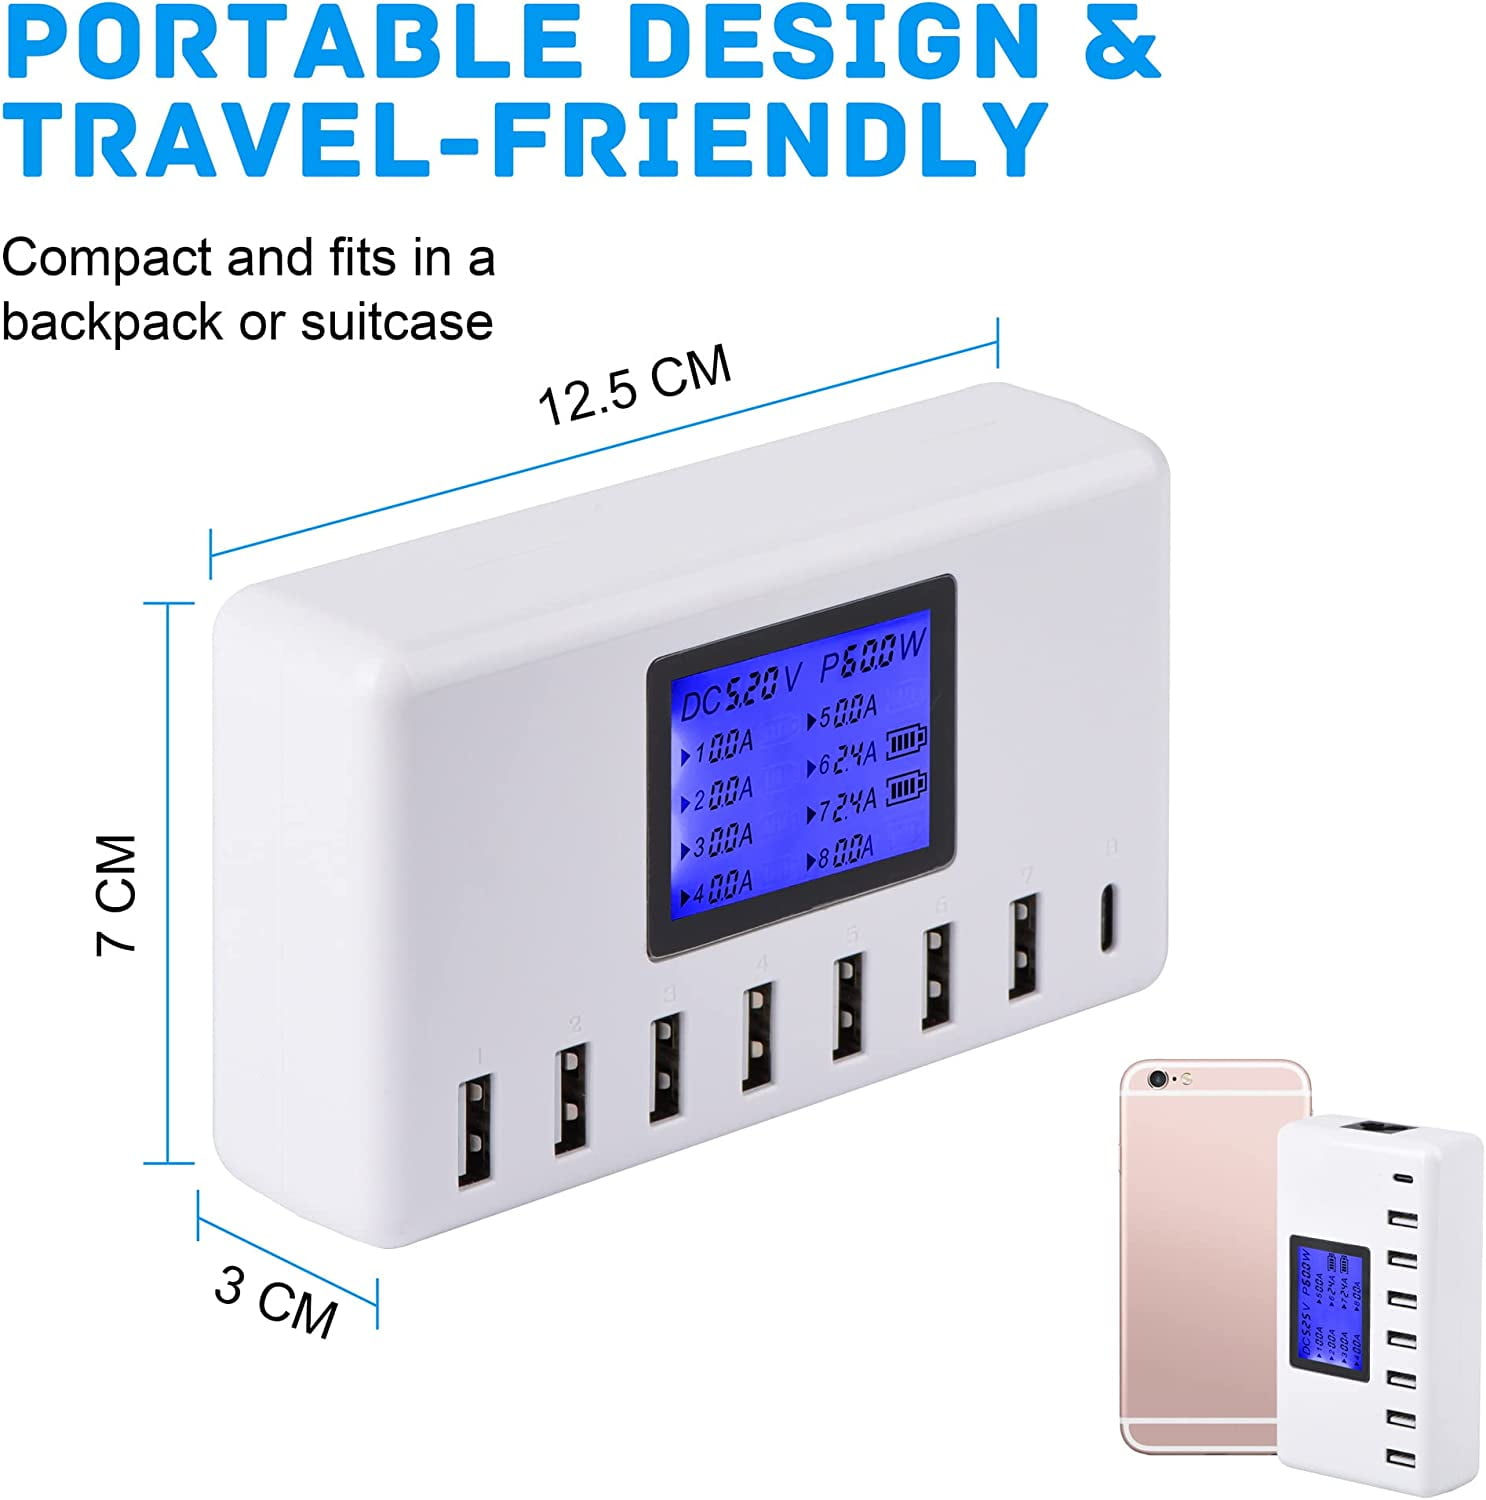 USB Charging Station, Ziwodiv 8-Ports USB Charger Station, 60W/12A Multi  Port USB C Hub Charger with LCD Display for Multiple Devices, Compact  Desktop Charging for iPhone iPad Samsung Android Tablet 